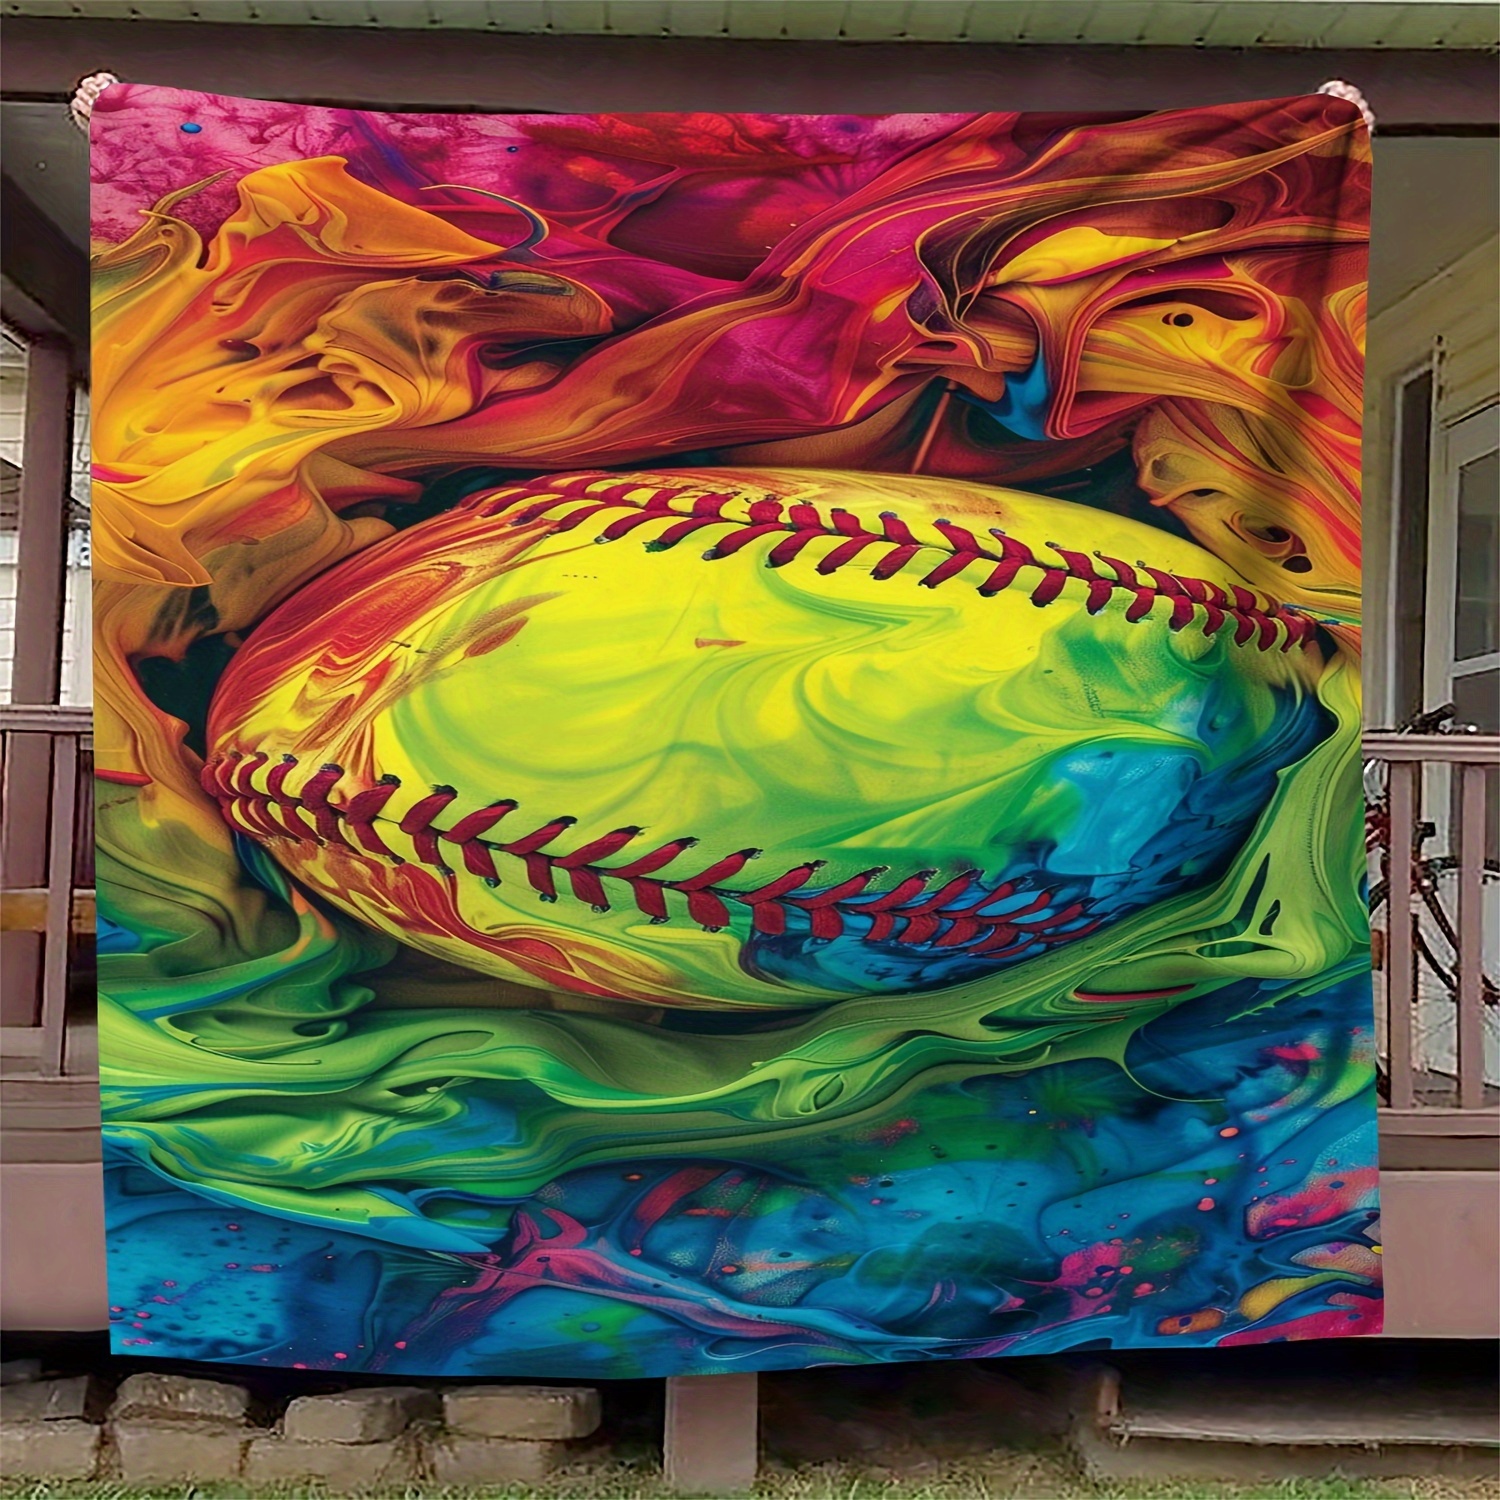 

1pc Color Block Baseball Painting Blanket Soft Flannel Sofa Blanket Tv Show Blanket Warm Cozy Nap Throw Blanket For Bed Sofa Travel